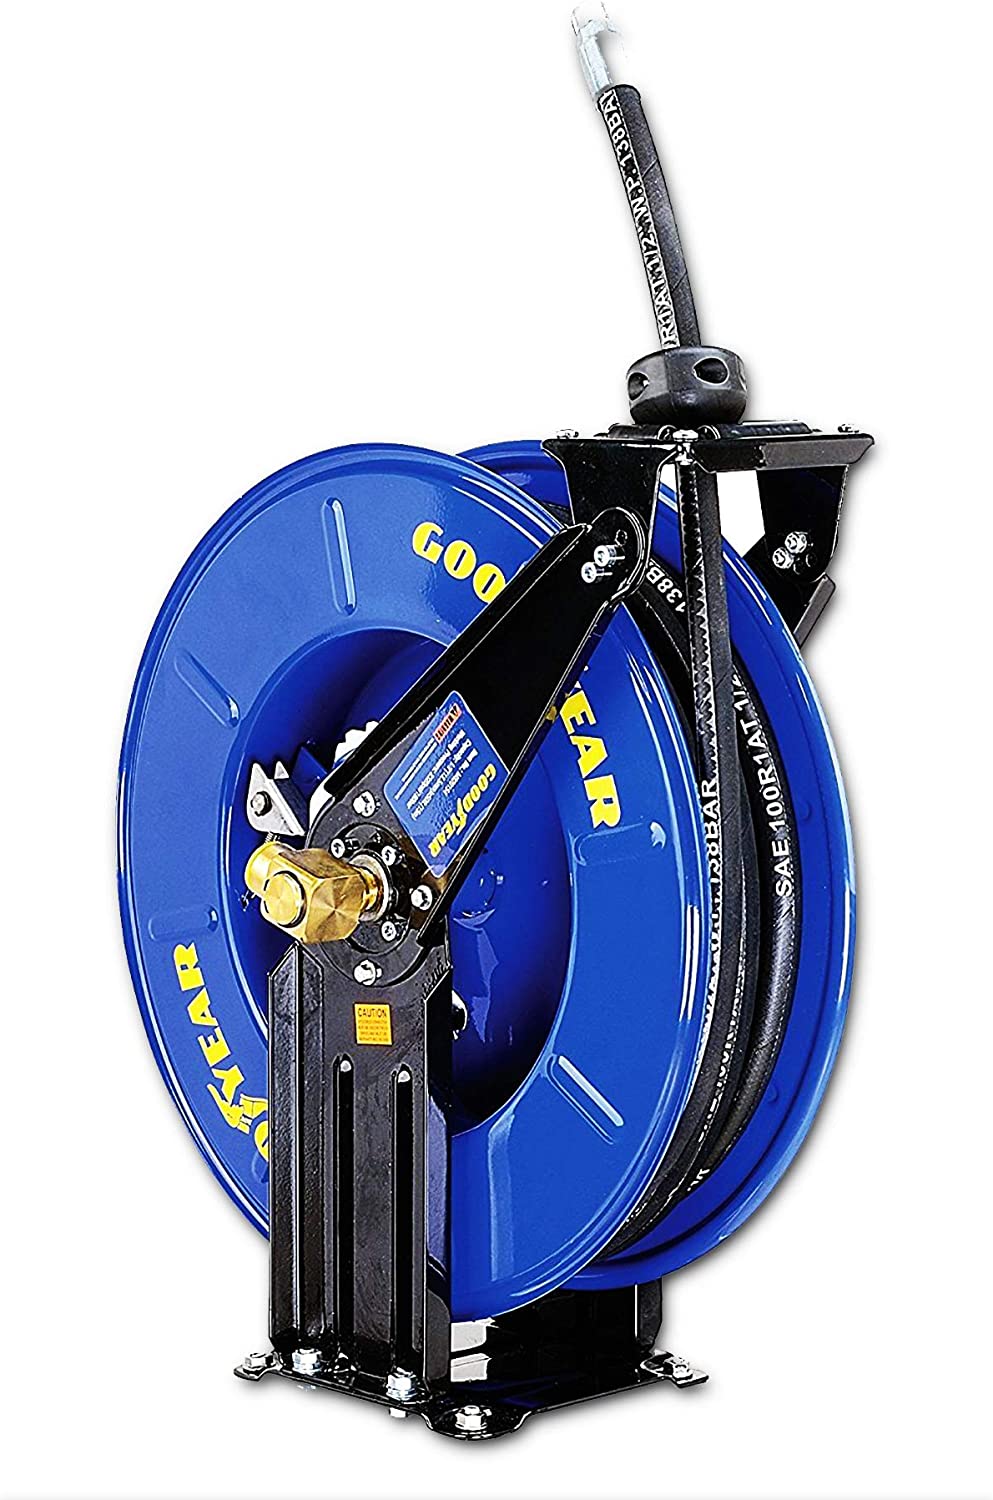 GOODYEAR Air/Water Hose Reel Retractable Spring Driven 3/8 Inch x 50' Feet  Long Premium Commercial SBR Hose Max 300 Psi Reinforced Steel Construction  Heavy Duty Industrial Dual Arm & Pedestal : 